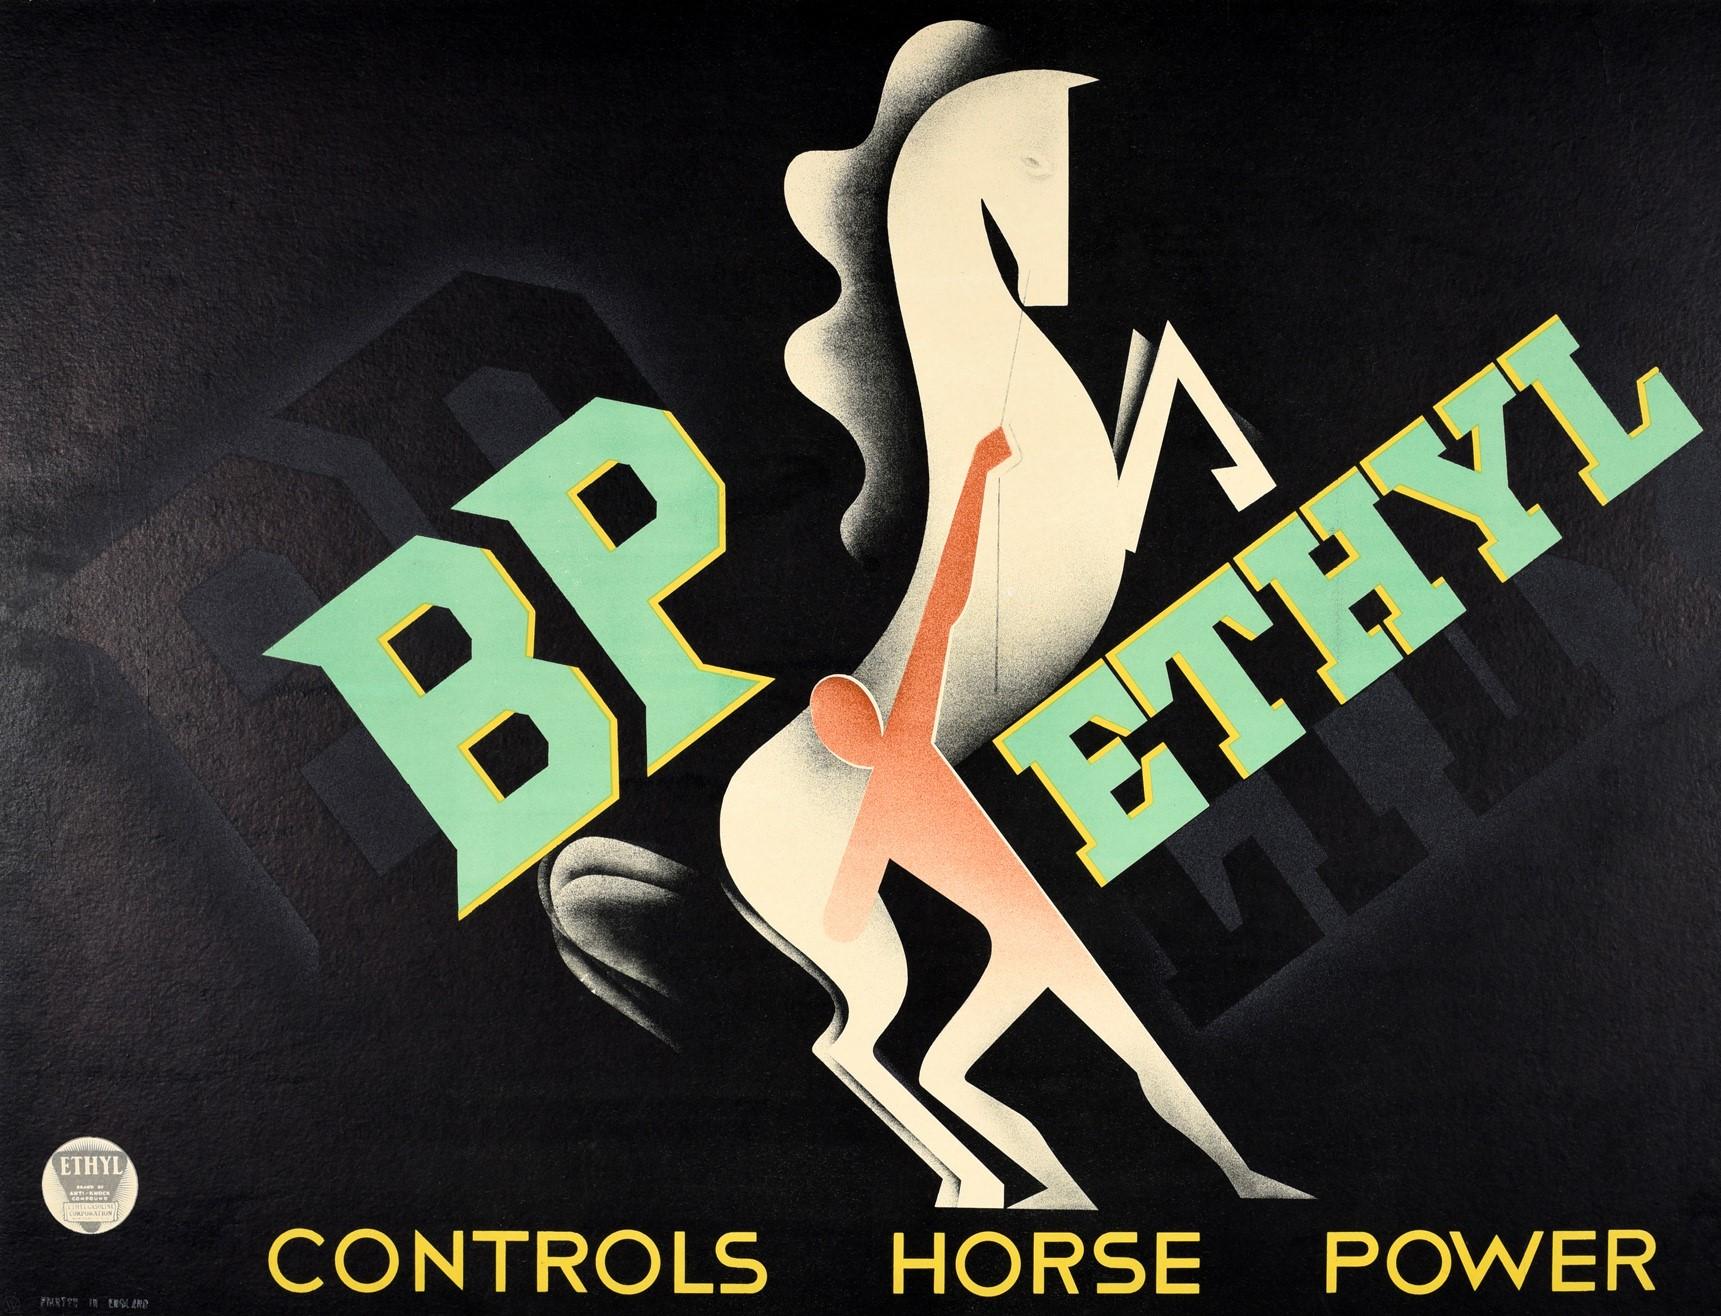 Original vintage poster - BP Ethyl Controls Horse Power - featuring a stunning modernist Art Deco graphic design by the Italian artist Paolo Garretto (1903-1989). Dynamic airbrush shaded image of a man restraining and harnessing power from an